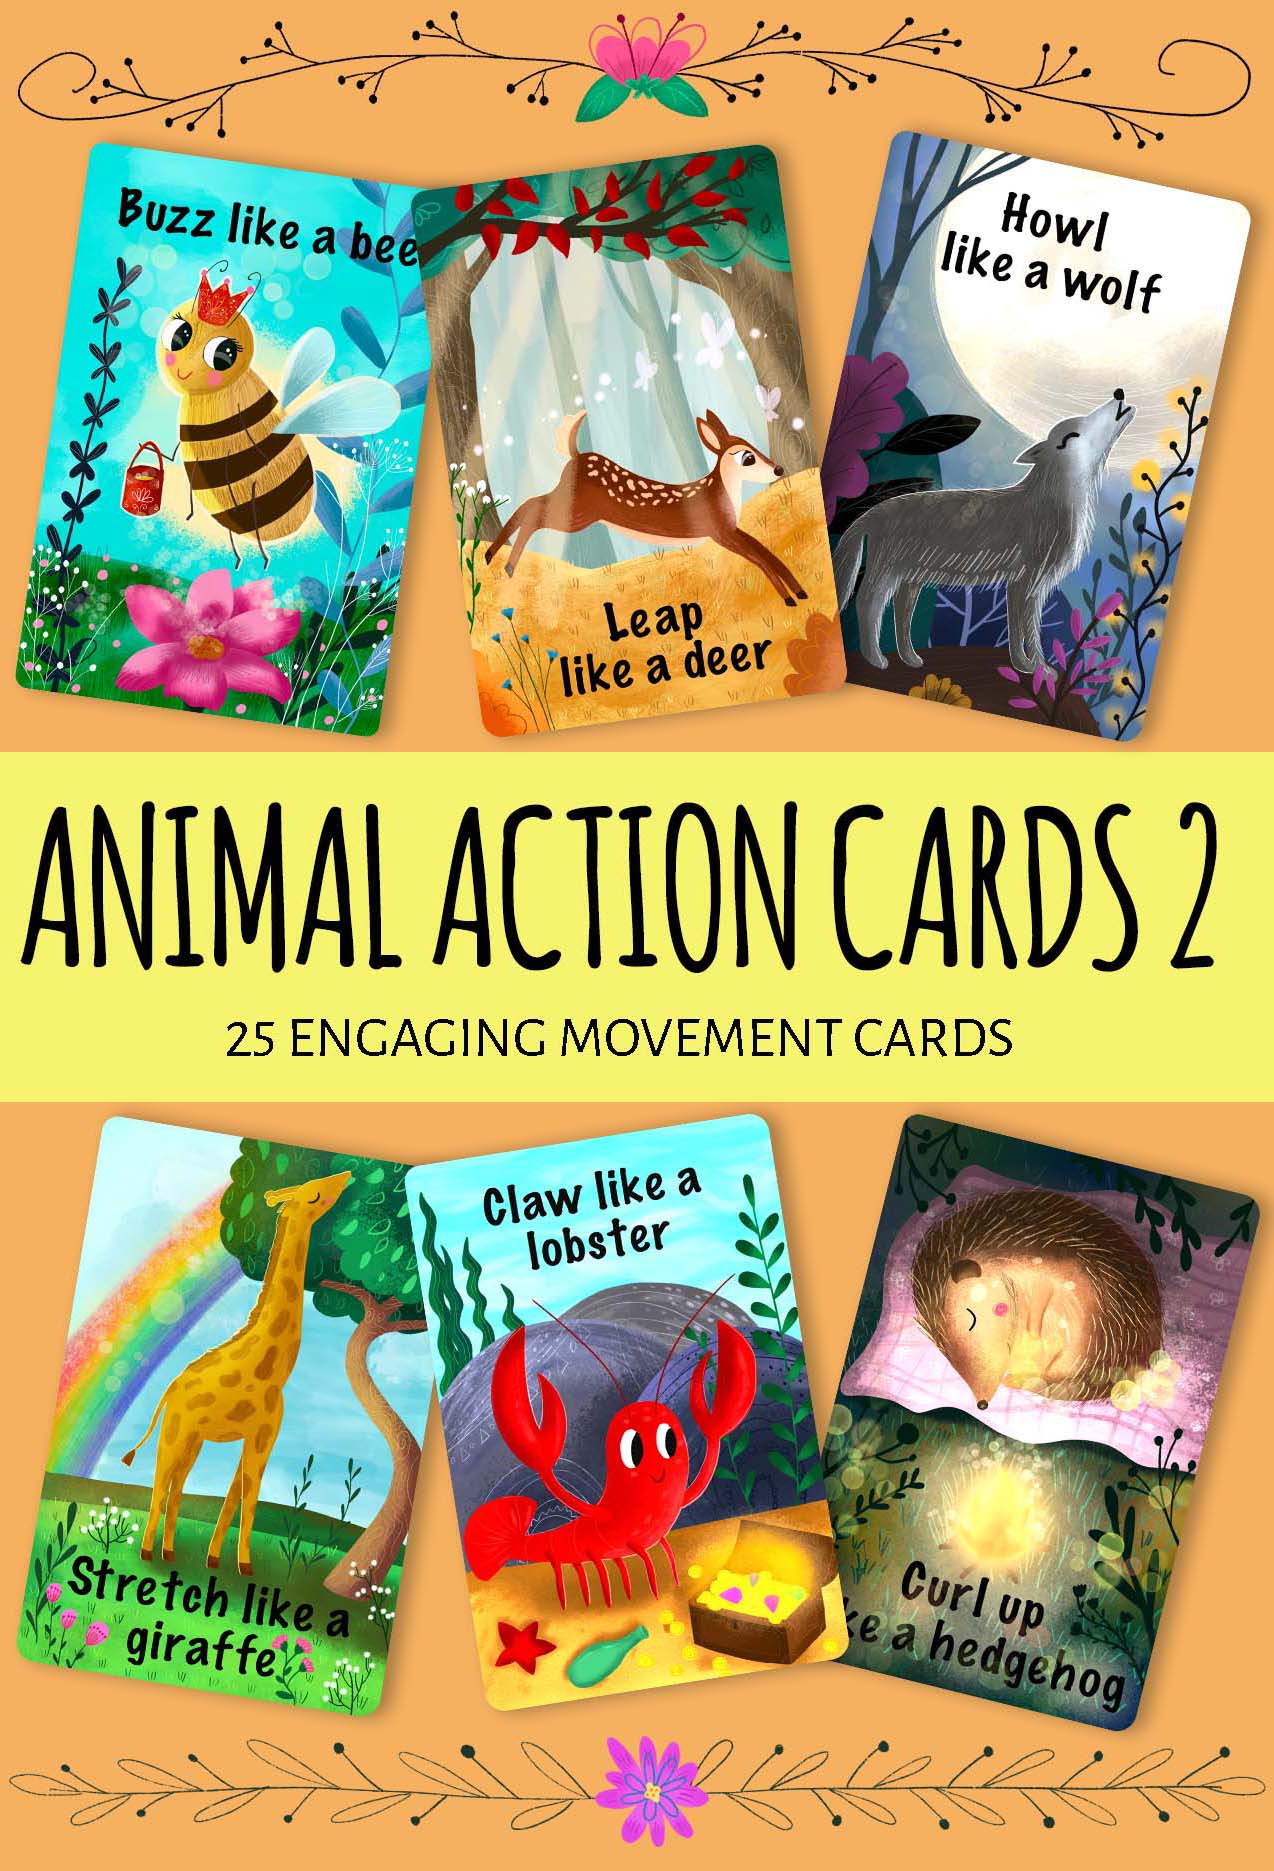 Animal action cards 2